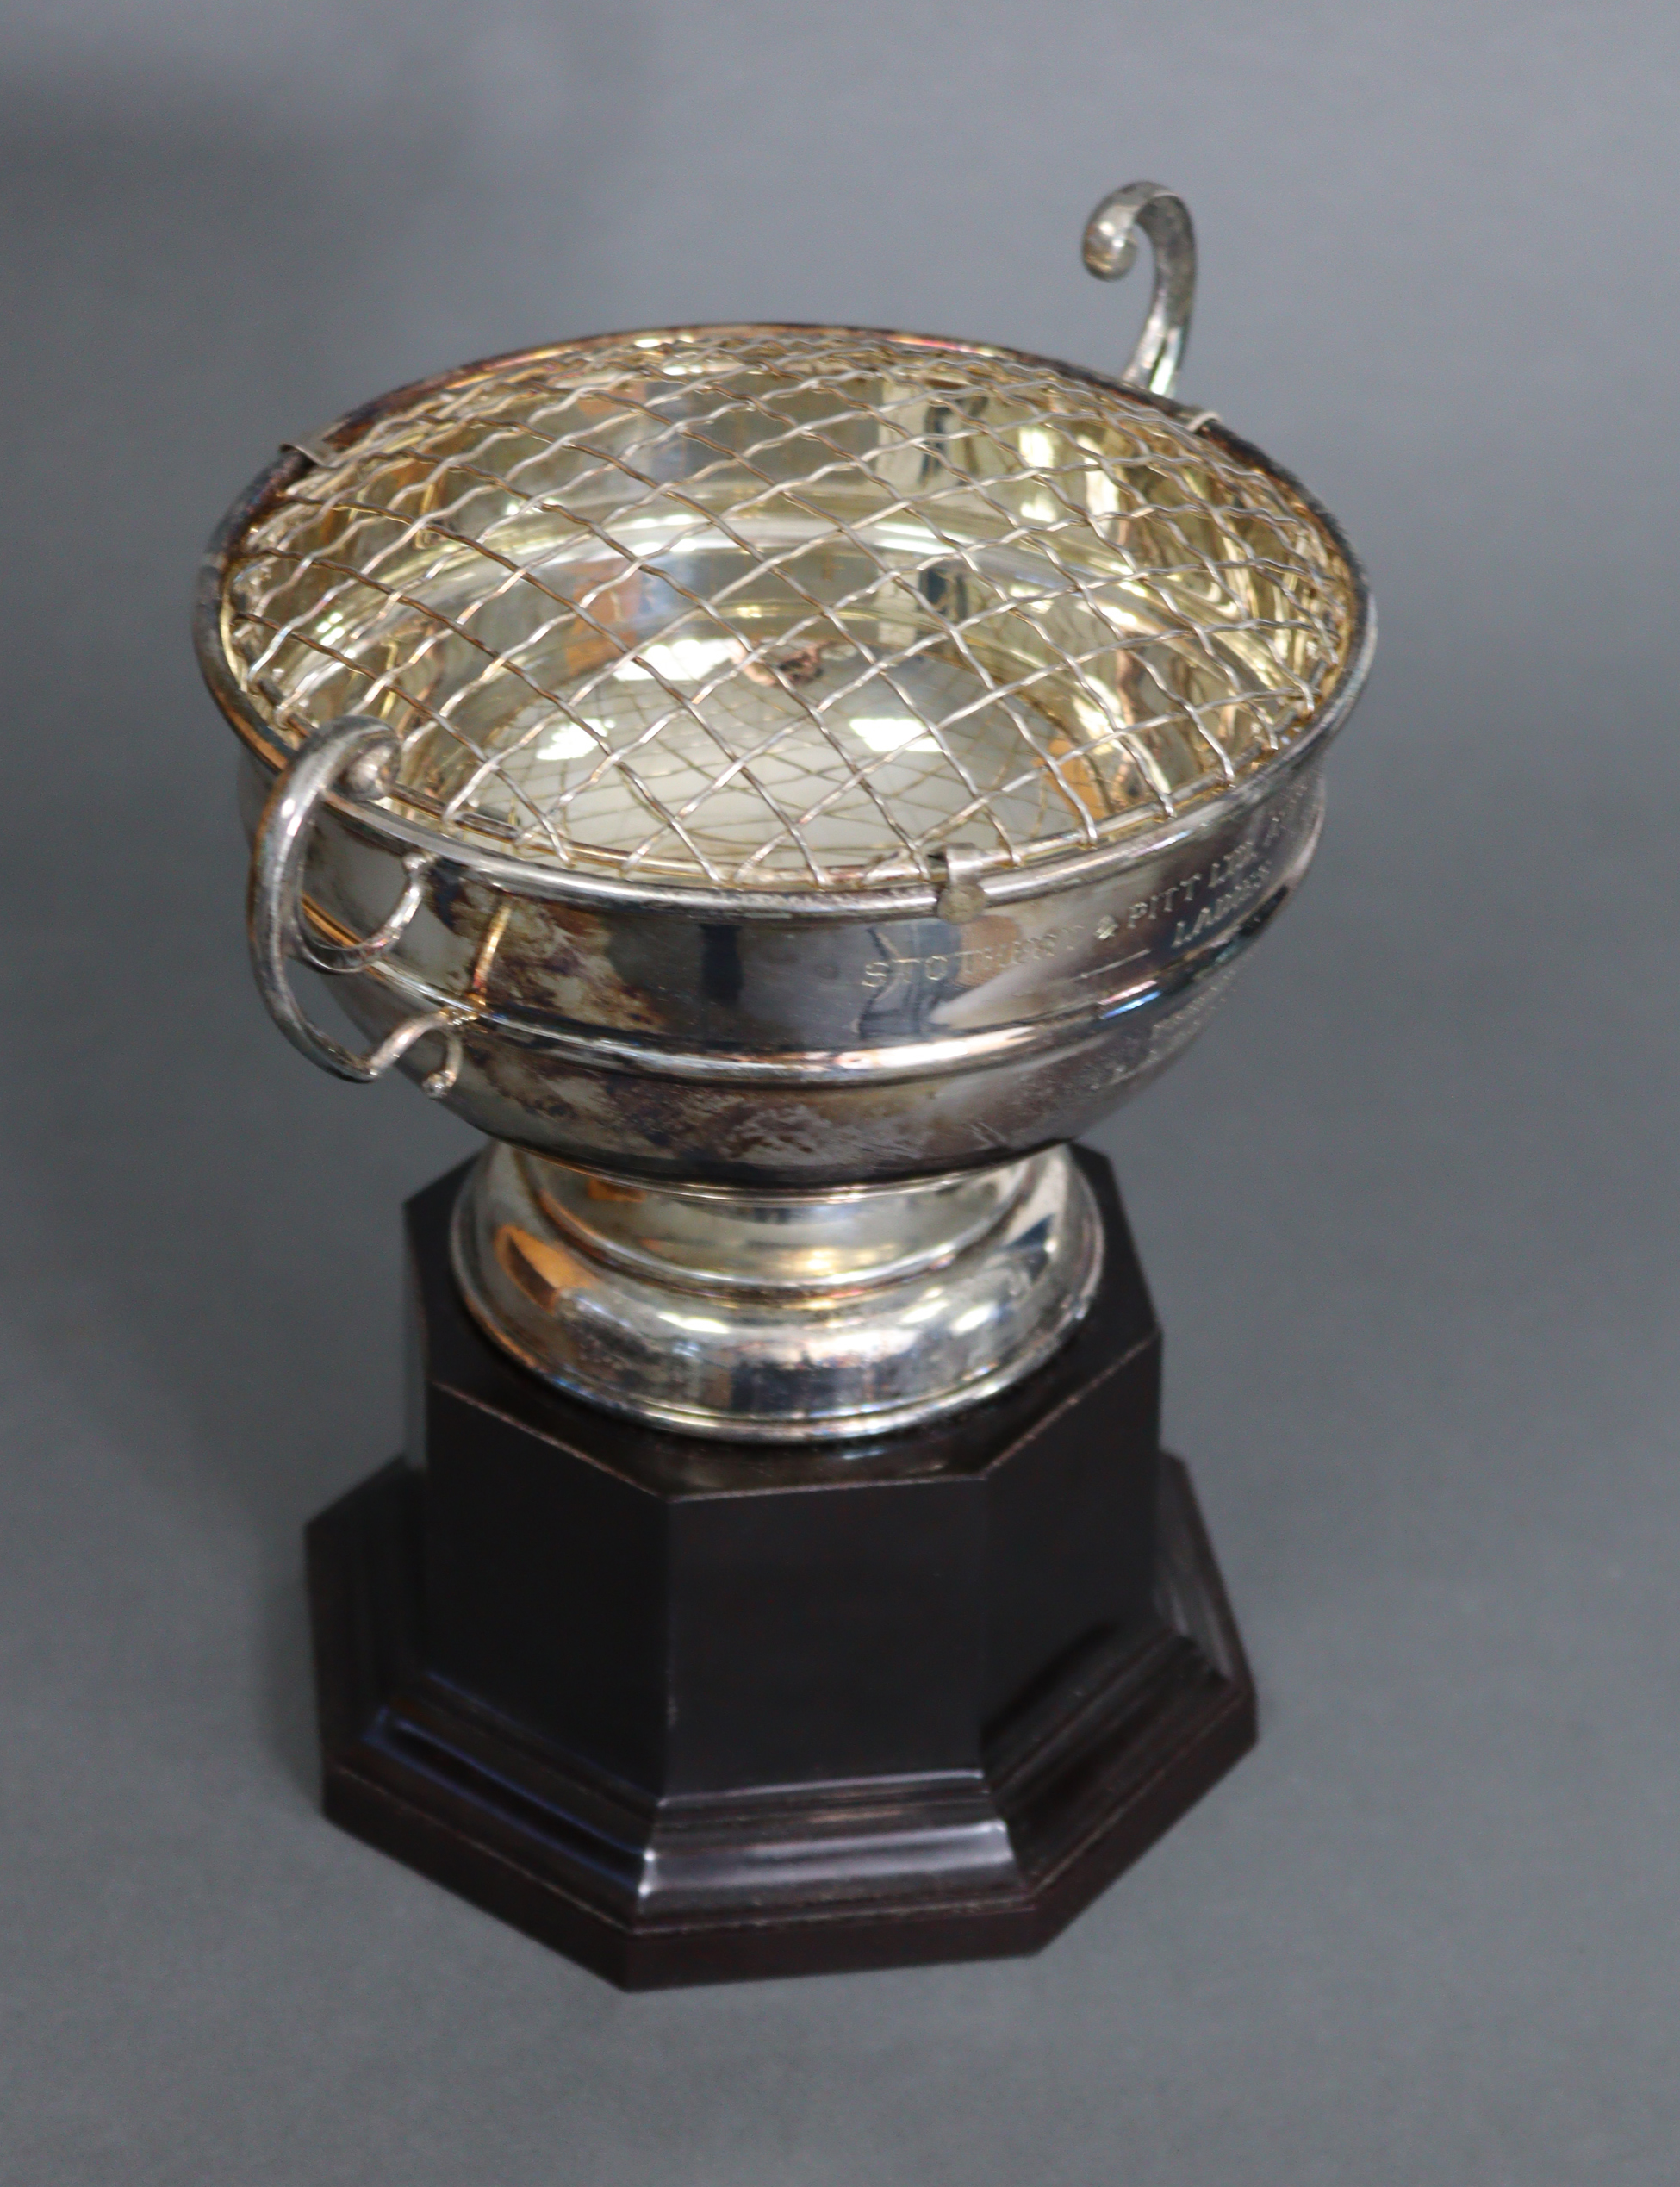 A 1980’s silver plated two-handled trophy rose bowl inscribed: “STOTHERT & PITT LTD ATHLETIC - Image 5 of 5